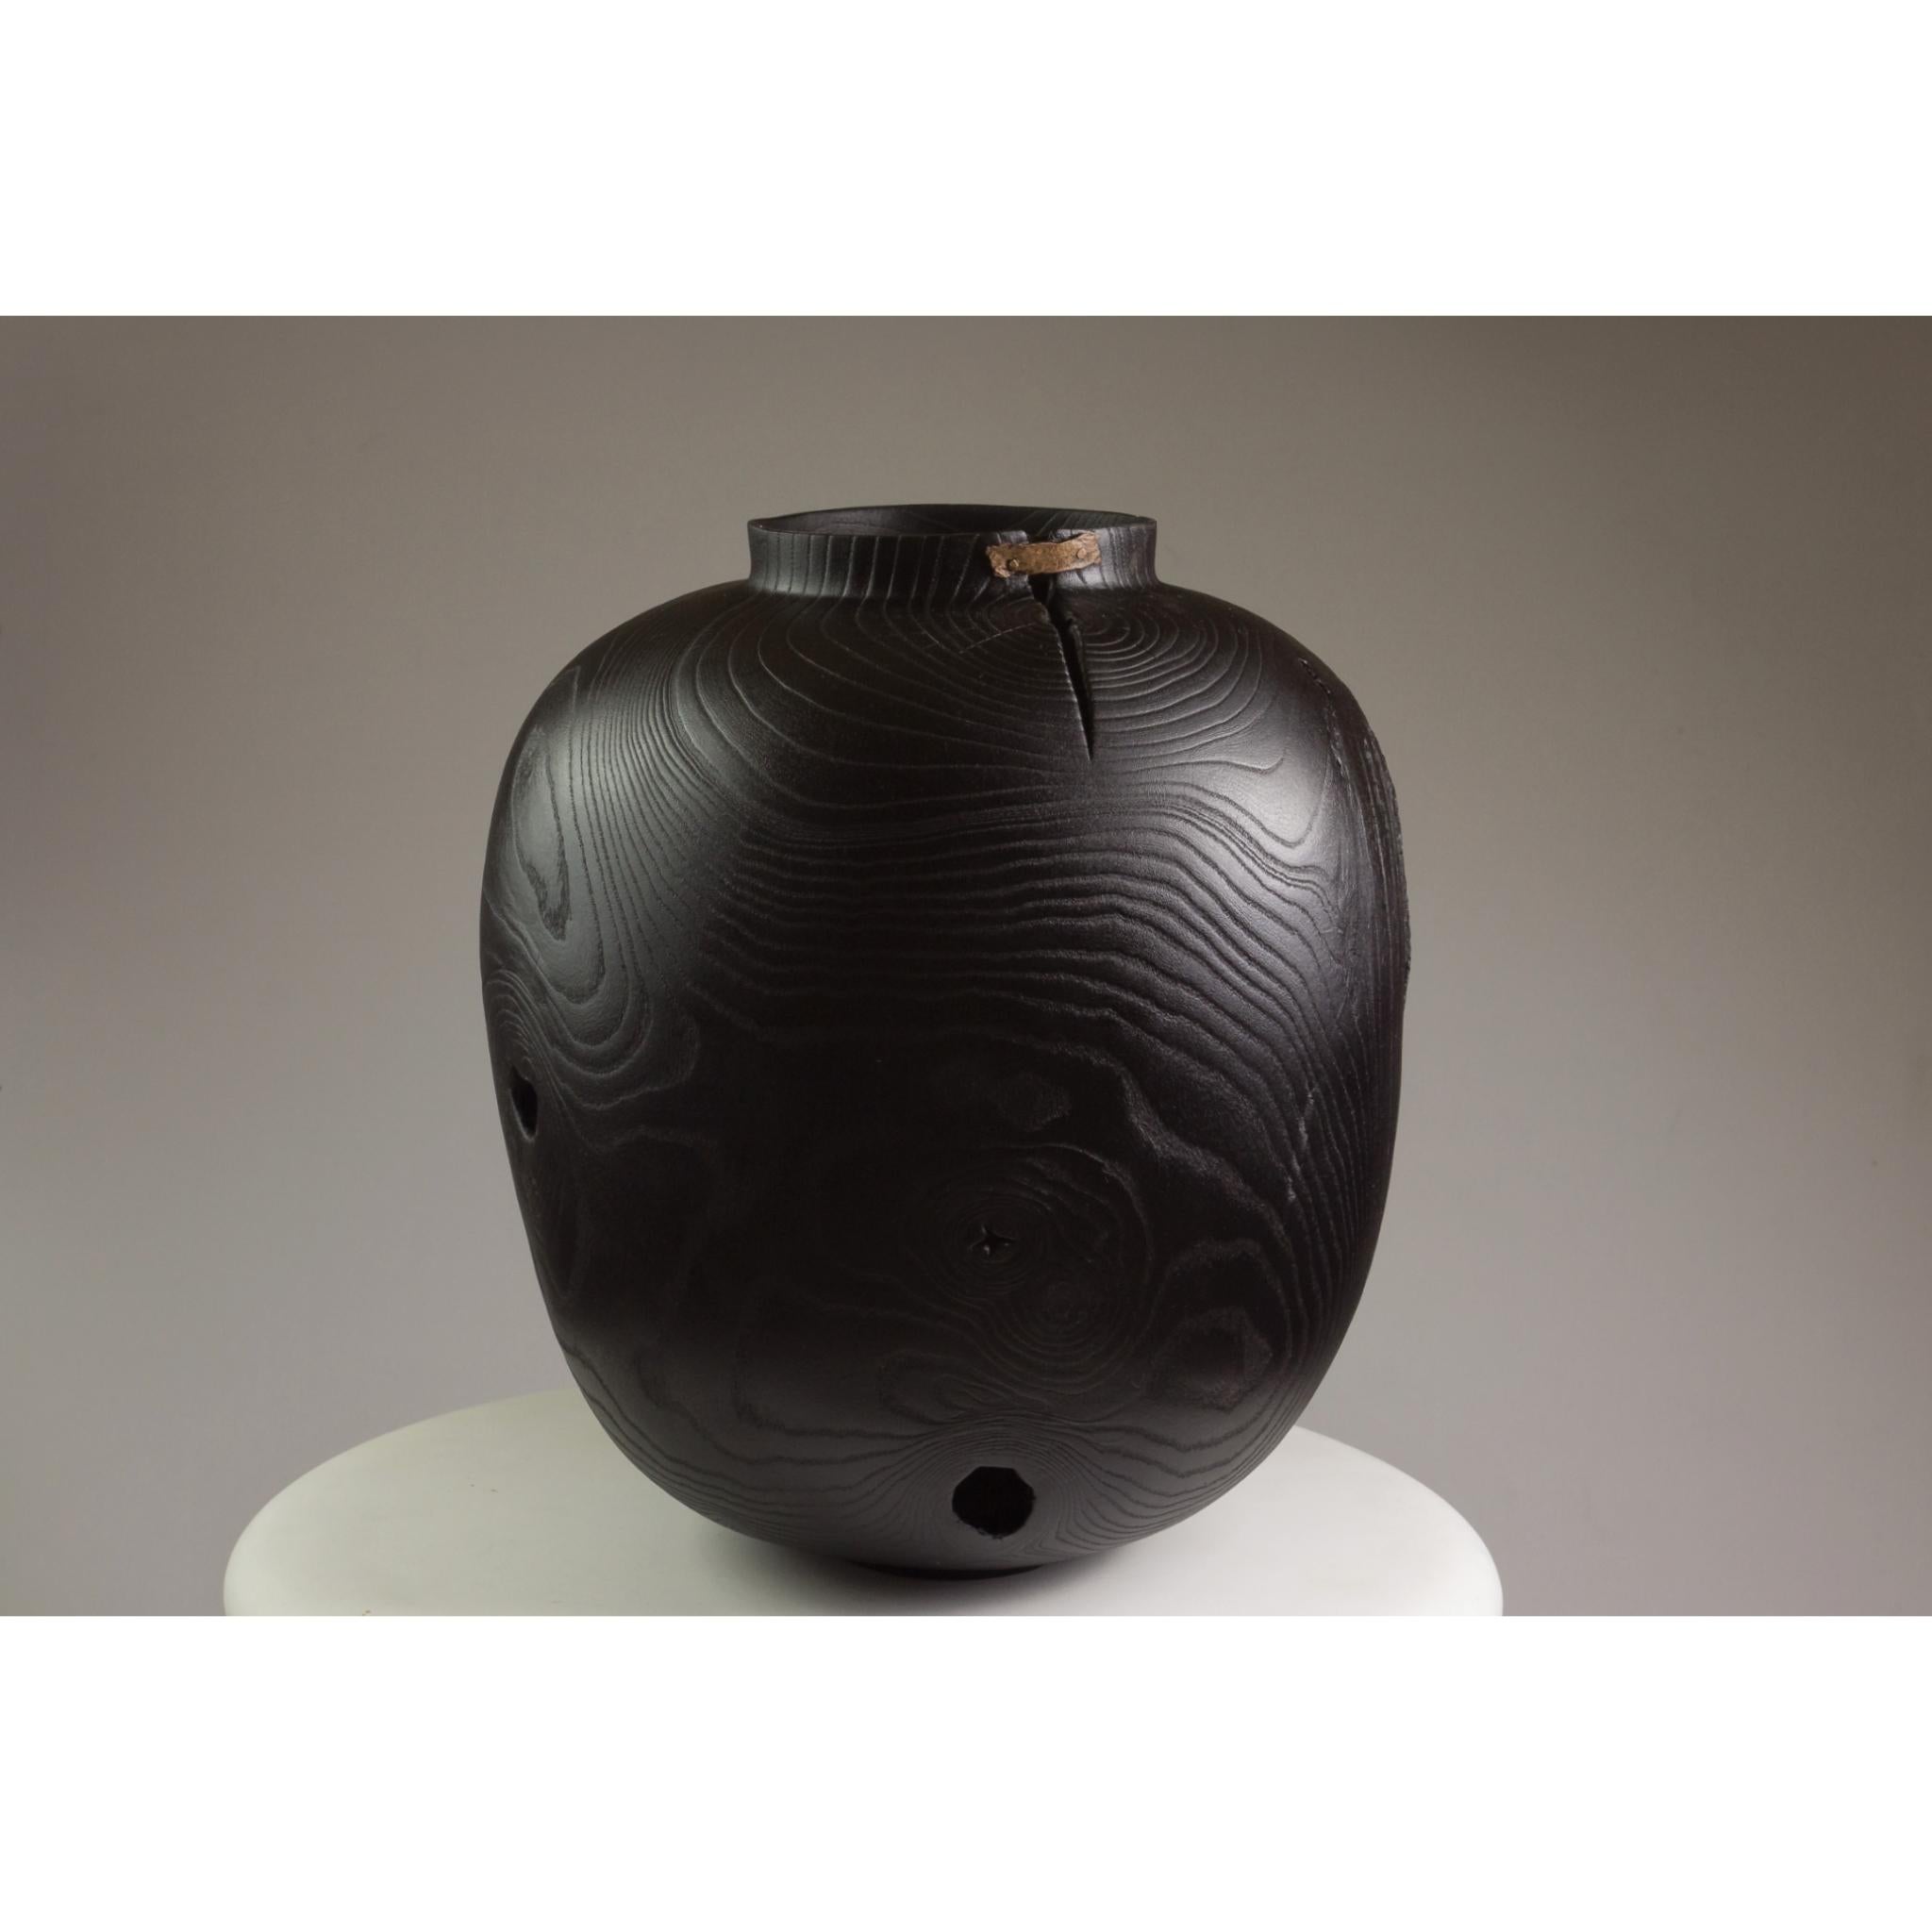 Ash and copper vase by Vlad Droz.
Dimensions: ?29 x H30 cm.
Materials: Ash and Copper.
One of a kind. 

Ash and Copper Vase by Russian Vlad Droz. This vase is greenturned, charred and sandblasted.

Vlad Droz
